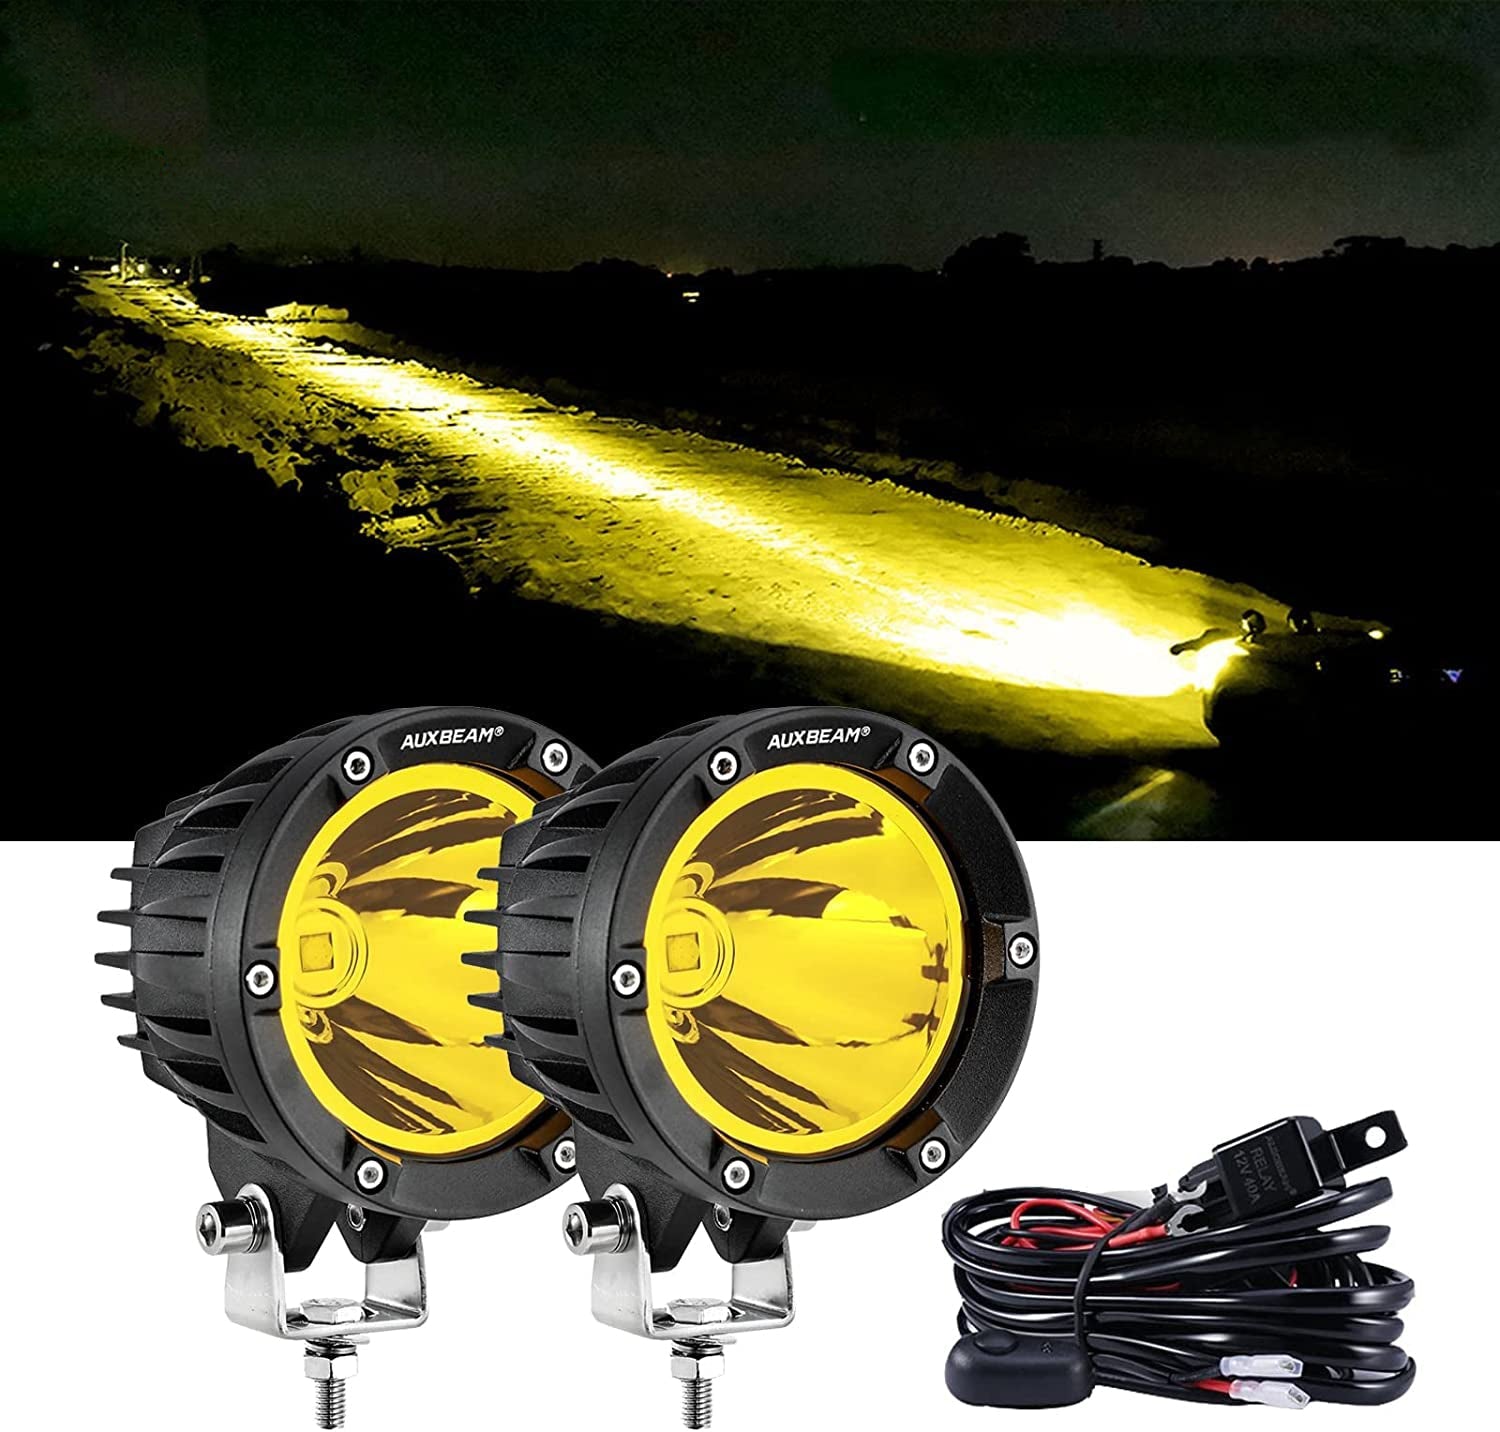 4 Inch 72W Round LED Driving Lights Pods Spot White/Amber with Wiring Harness for SUV ATV UTV Trucks Pickup Boat